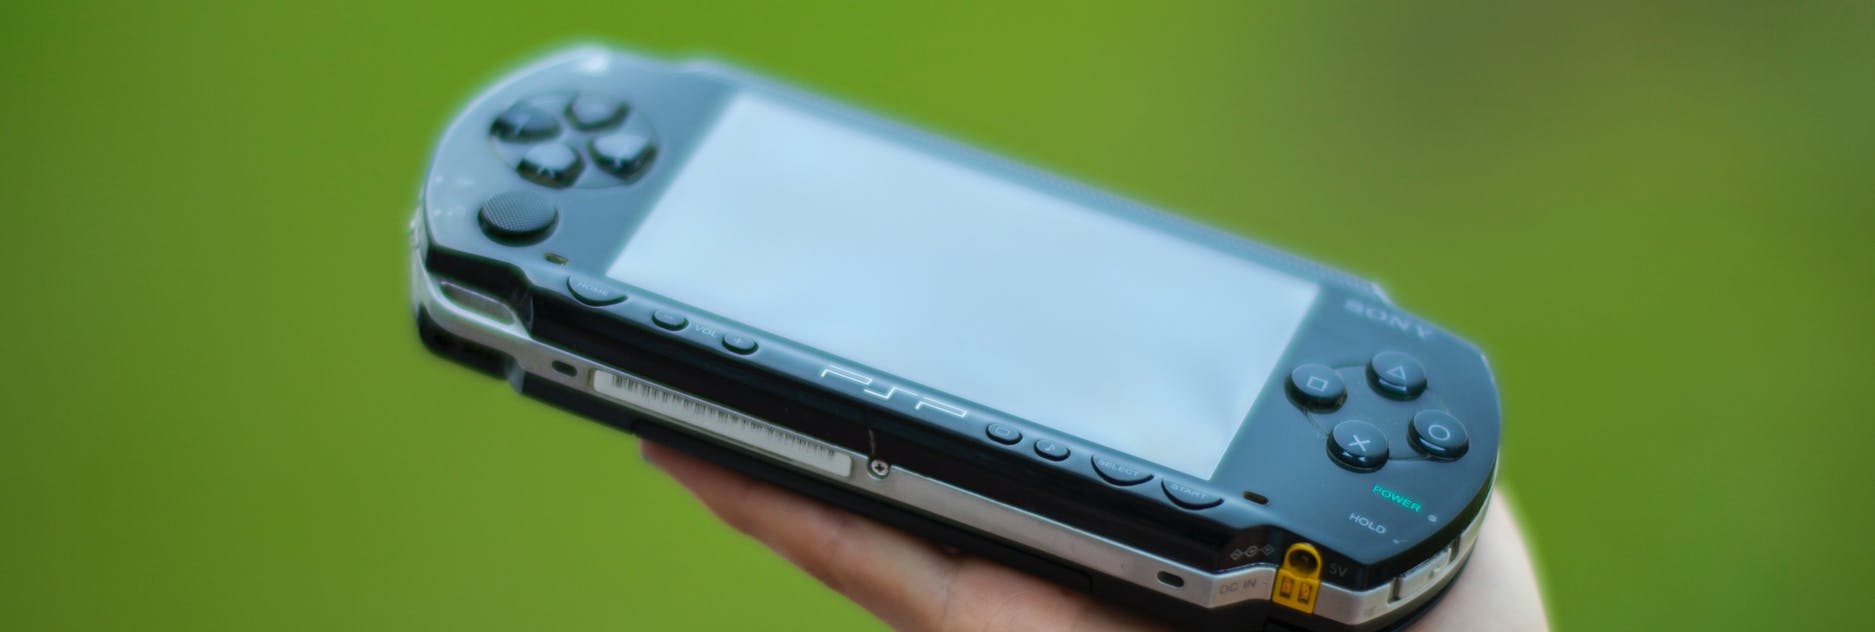 closeup photography of person holding black sony psp handheld console